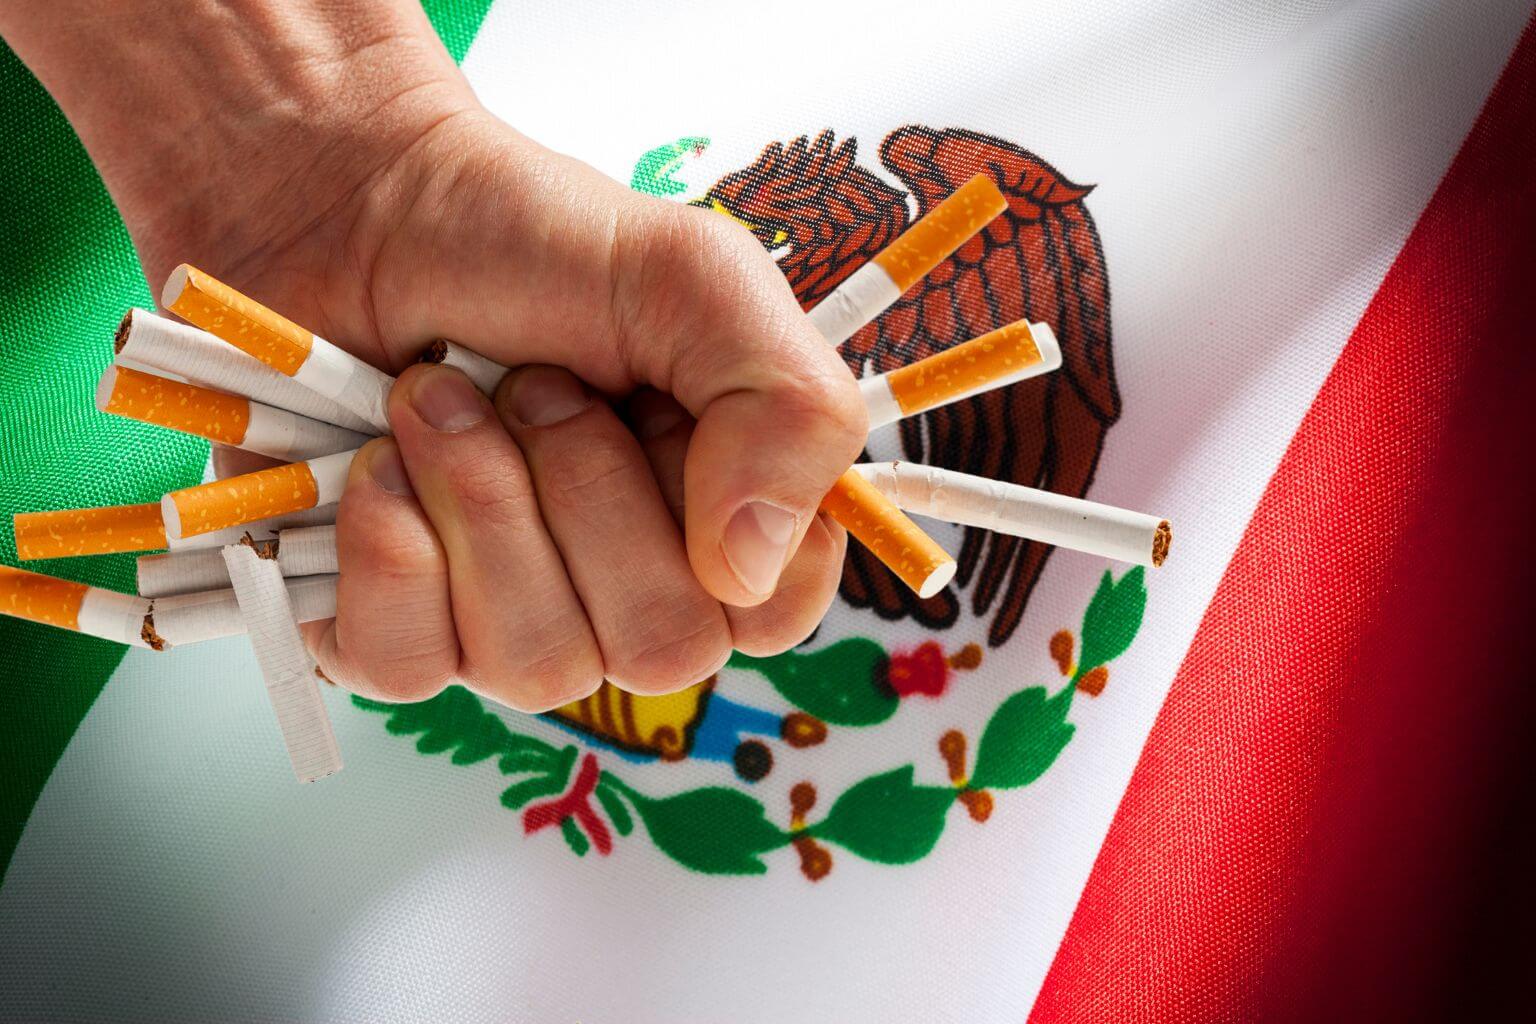 New Smoking Laws in Mexico